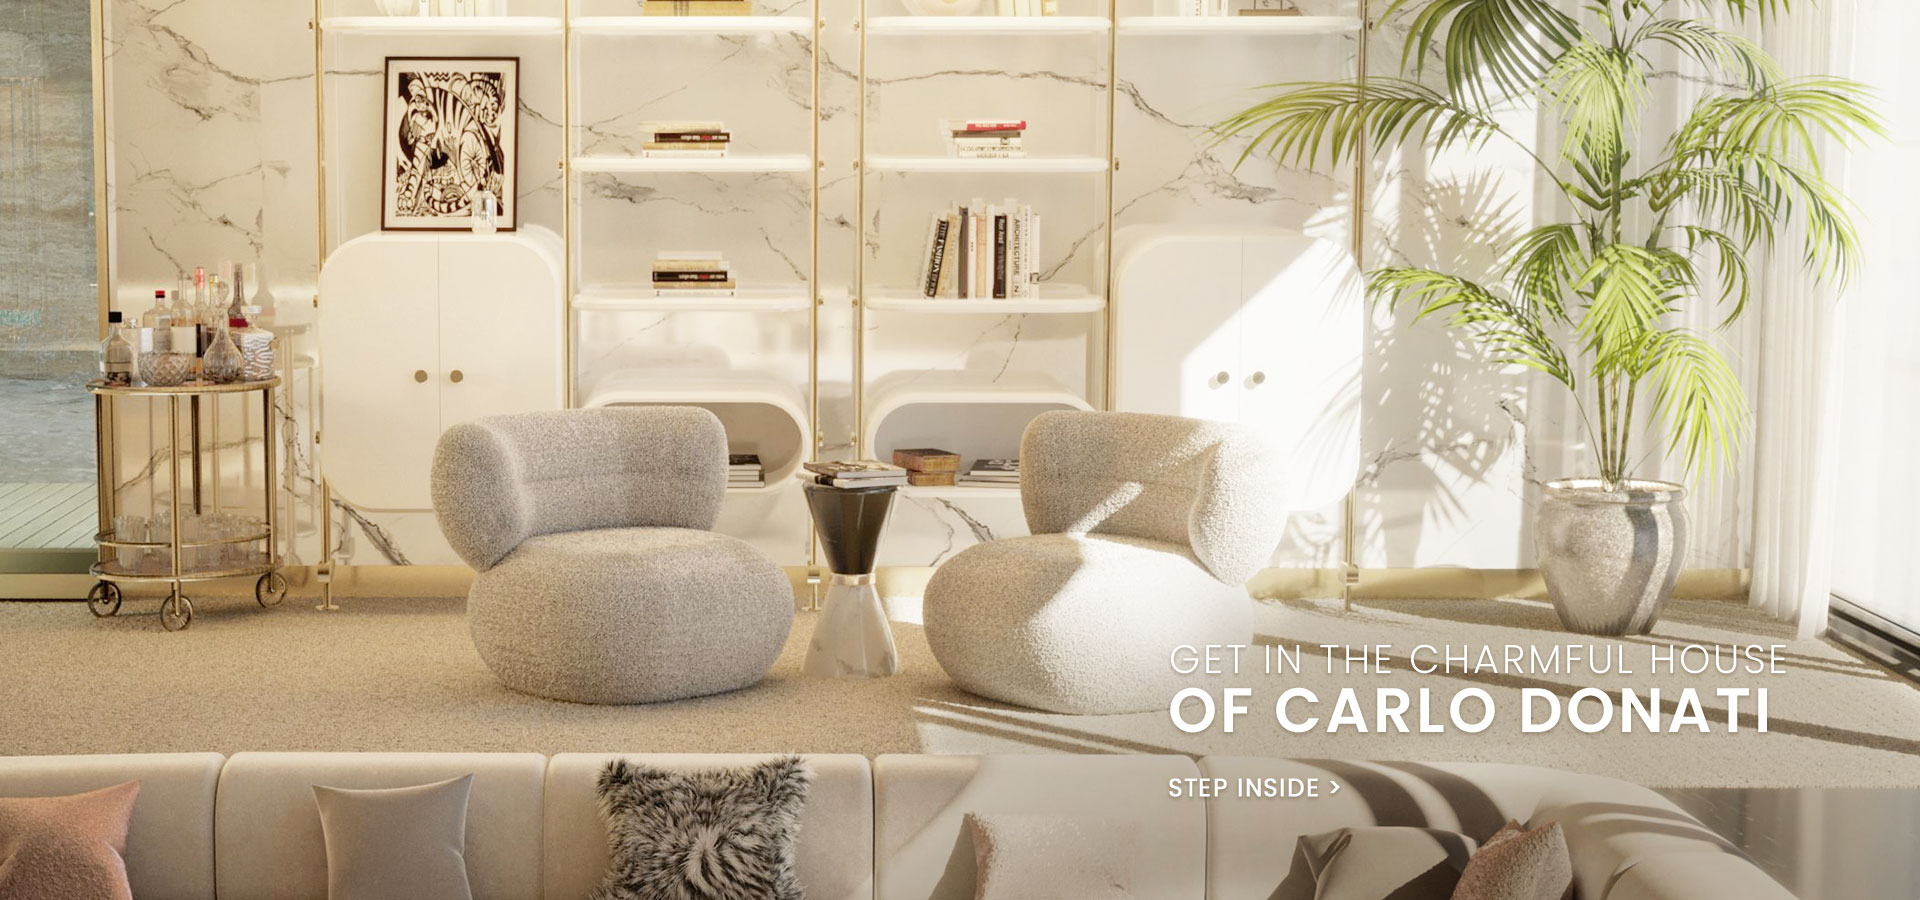 carlodonatihousevt  Karim Rashid Shares His Signature Philosophy With Essential Home: The New Collection We’re All Waiting For! saint tropez carlo donati home